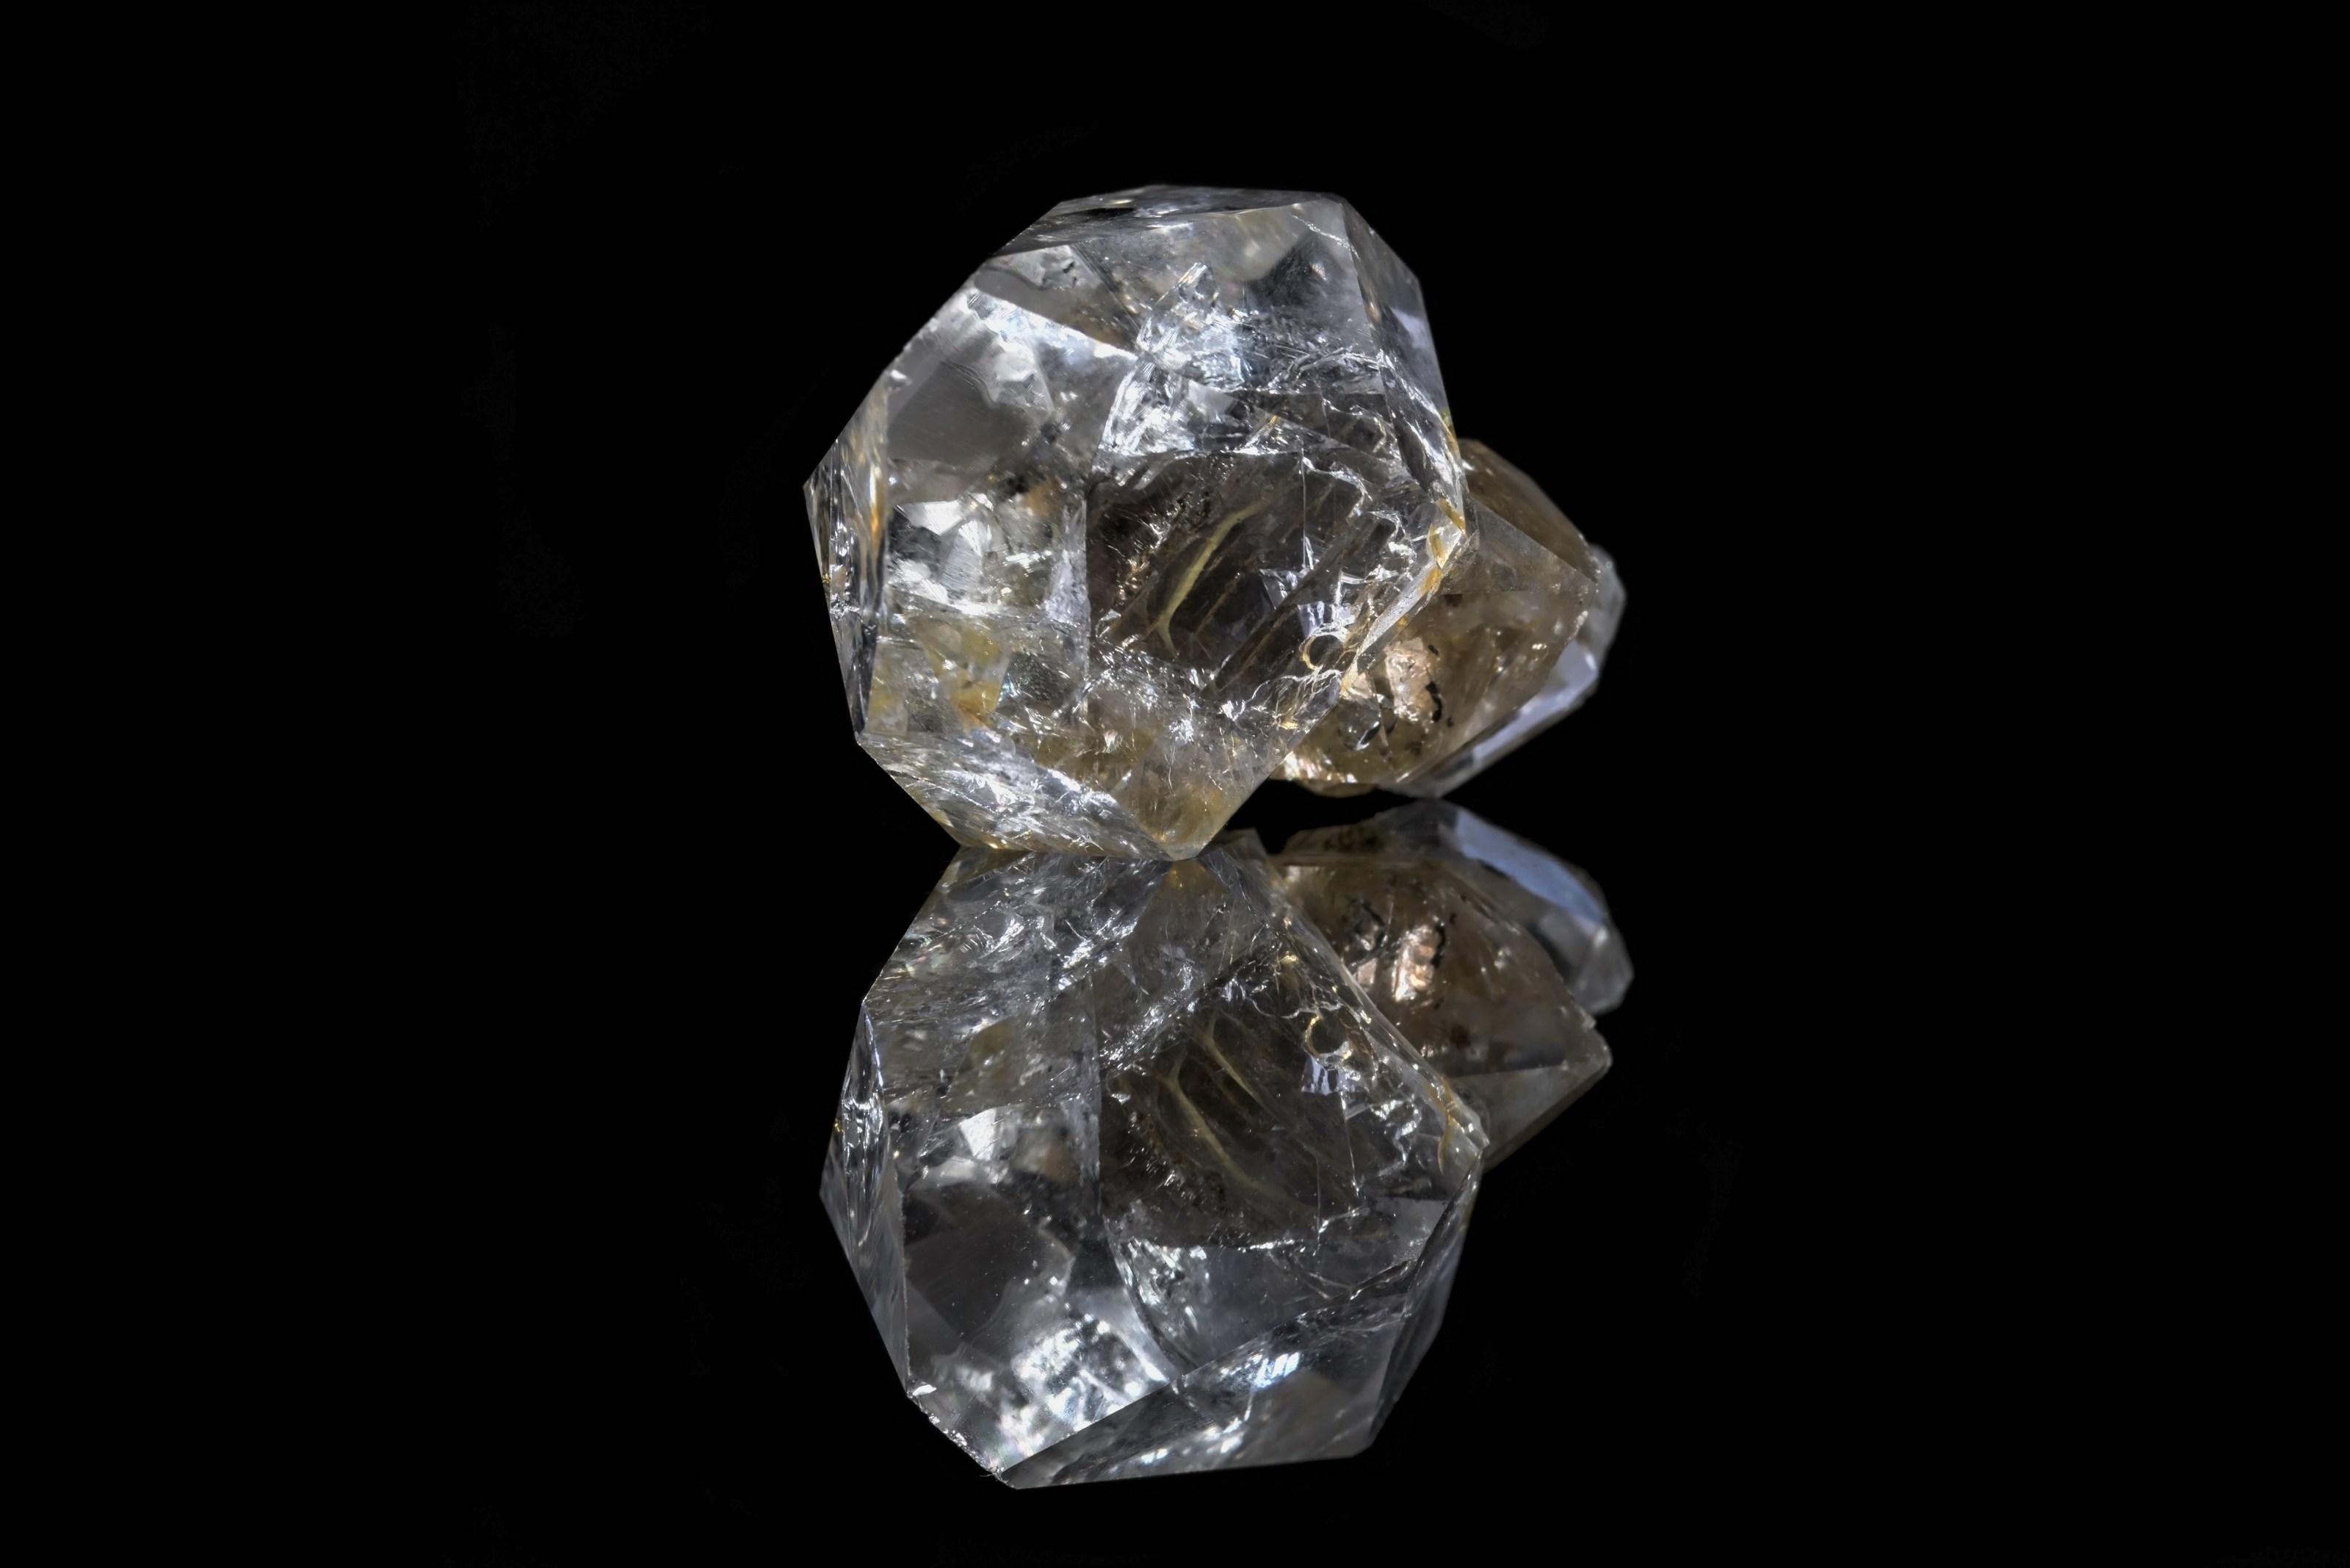 Covid-19 in India limited rough diamond sales: De Beers - The Retail  Jeweller India